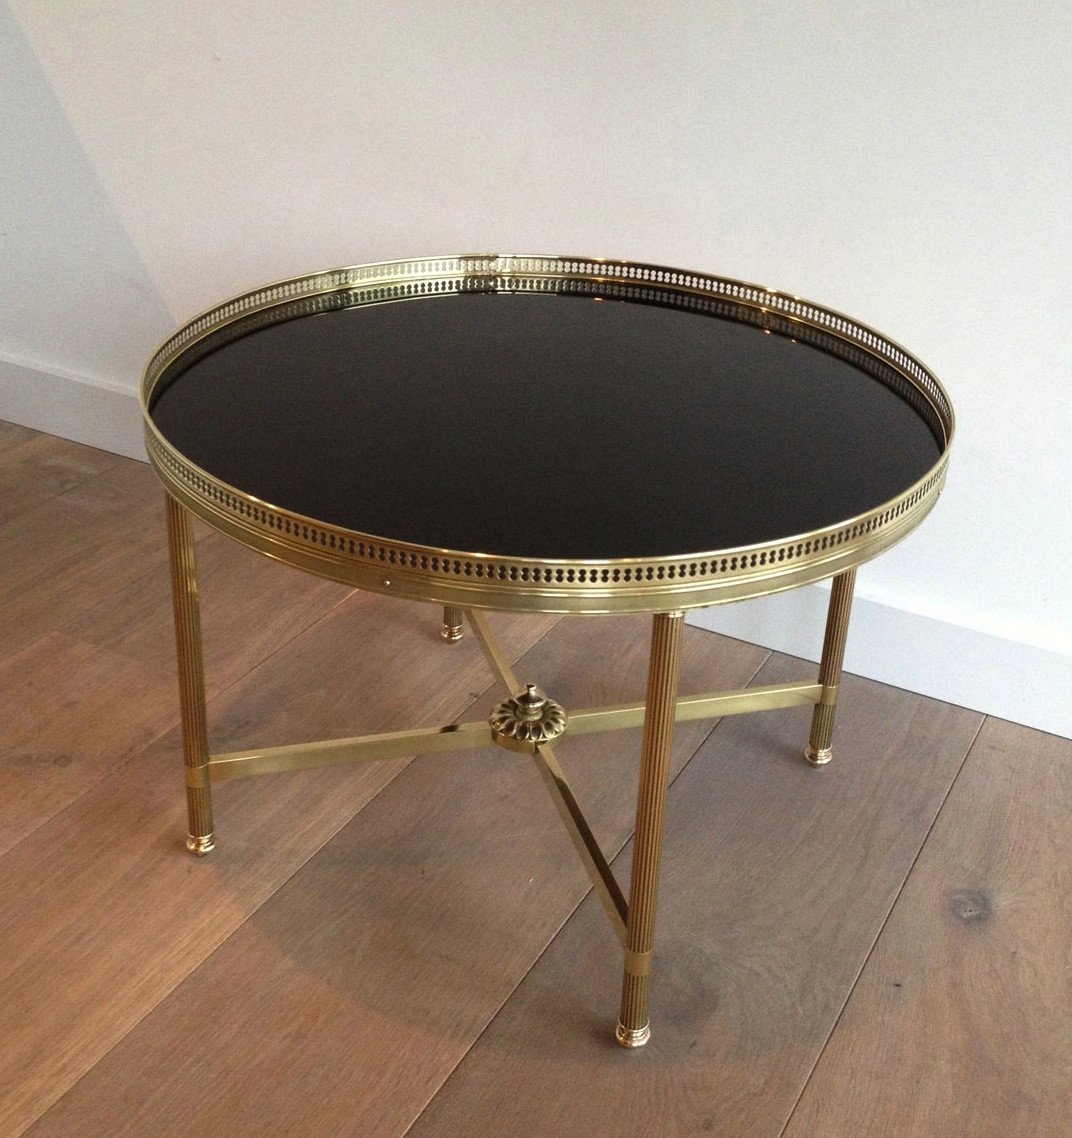 Maison Bagués. Neoclassical Style Round Brass Coffee Table With Black Lacquered Top. Circa 1940